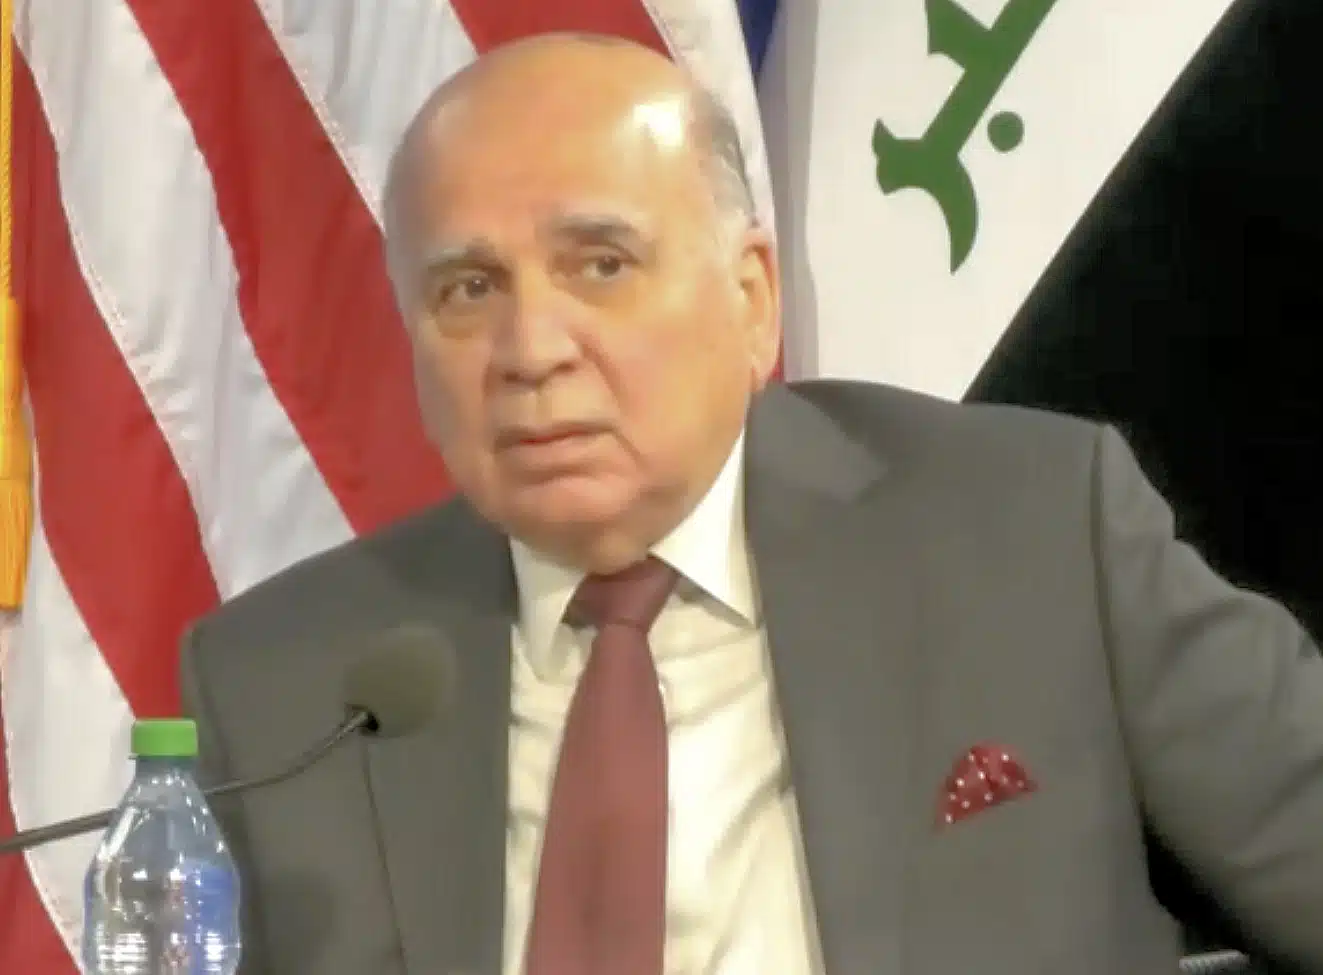 Iraqi Foreign Minister Calls for American Help With Decentralization, ‘Cultural Change’